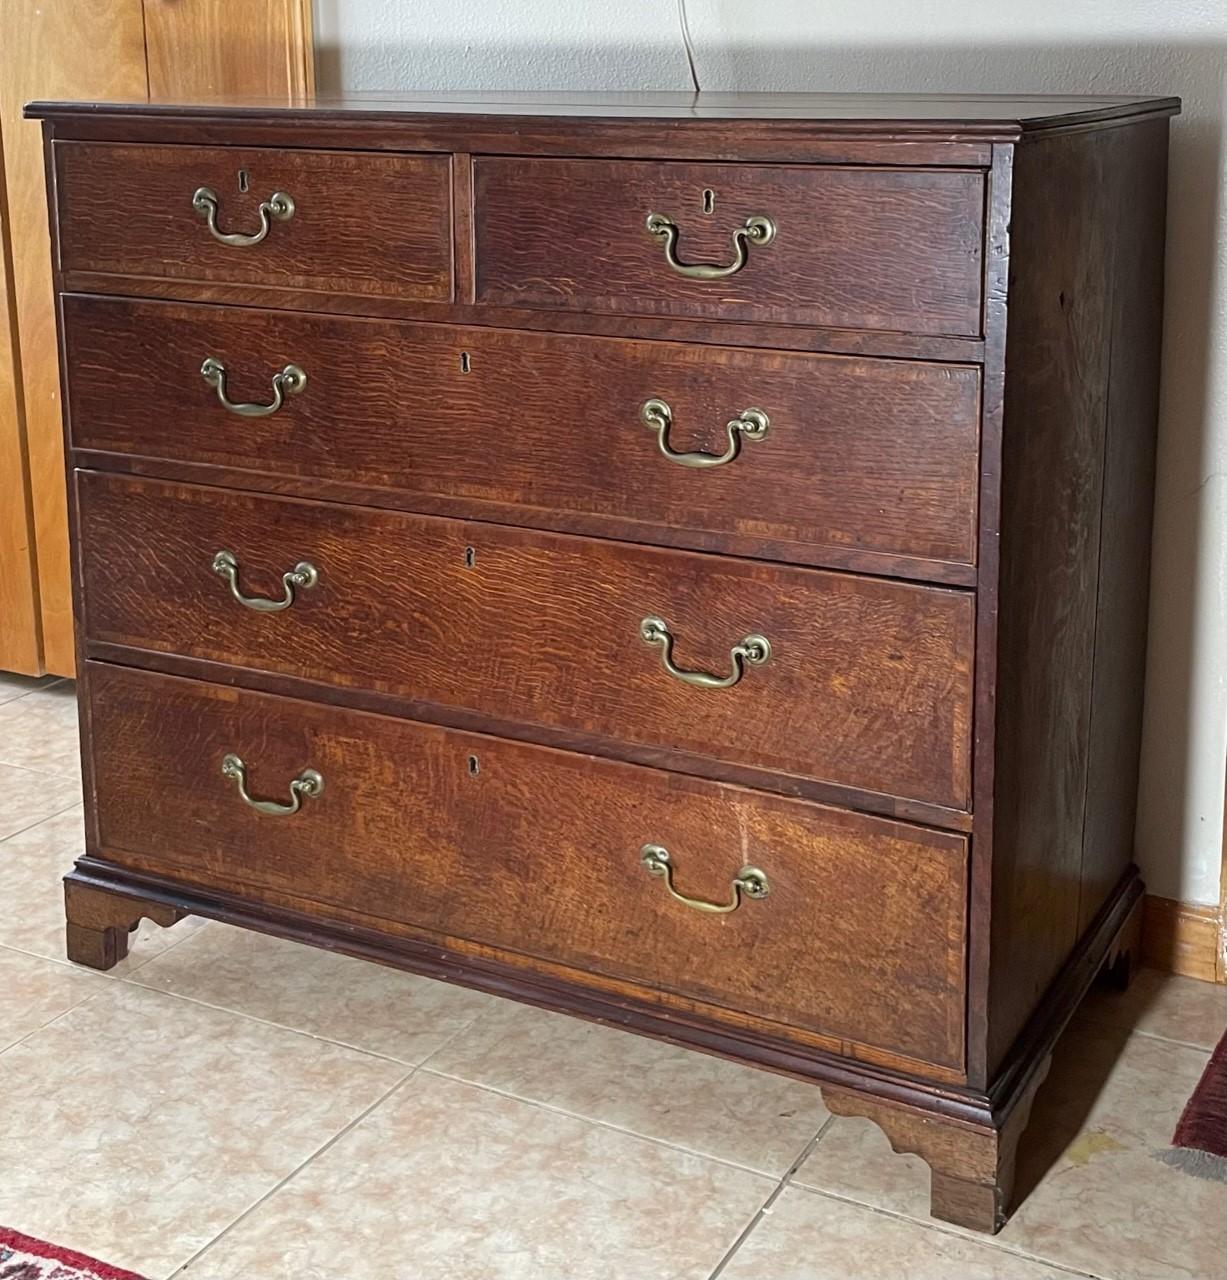 George III 18th Century George Lll Oak Chest of Drawers with Original Hardware